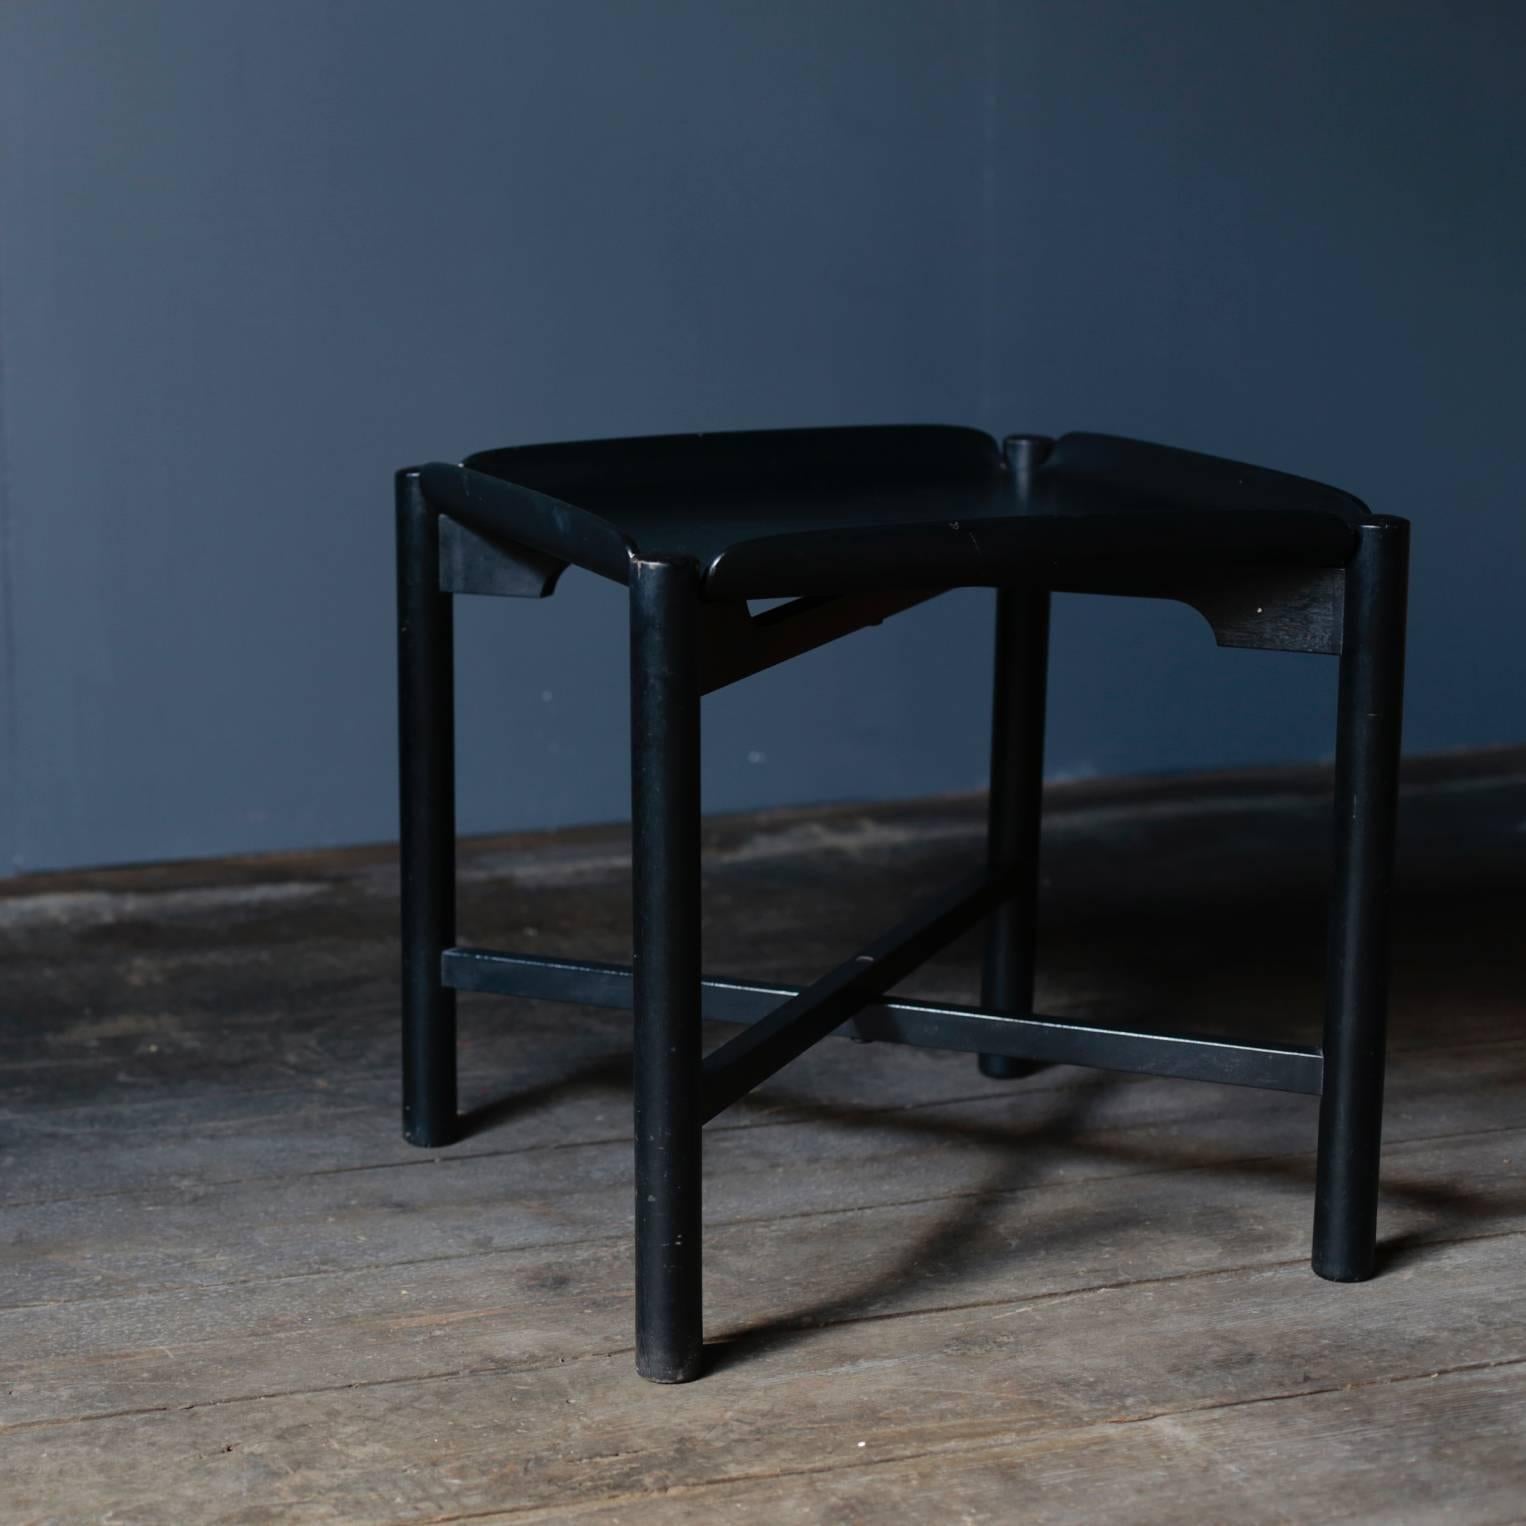 A folding tray table designed in 1963 by Katsuo Matsumura who built a cornerstone of postwar furniture design with a long-time work, Tadashi Mizuno and others.
Production is based on Tokyo's woodworking maker 